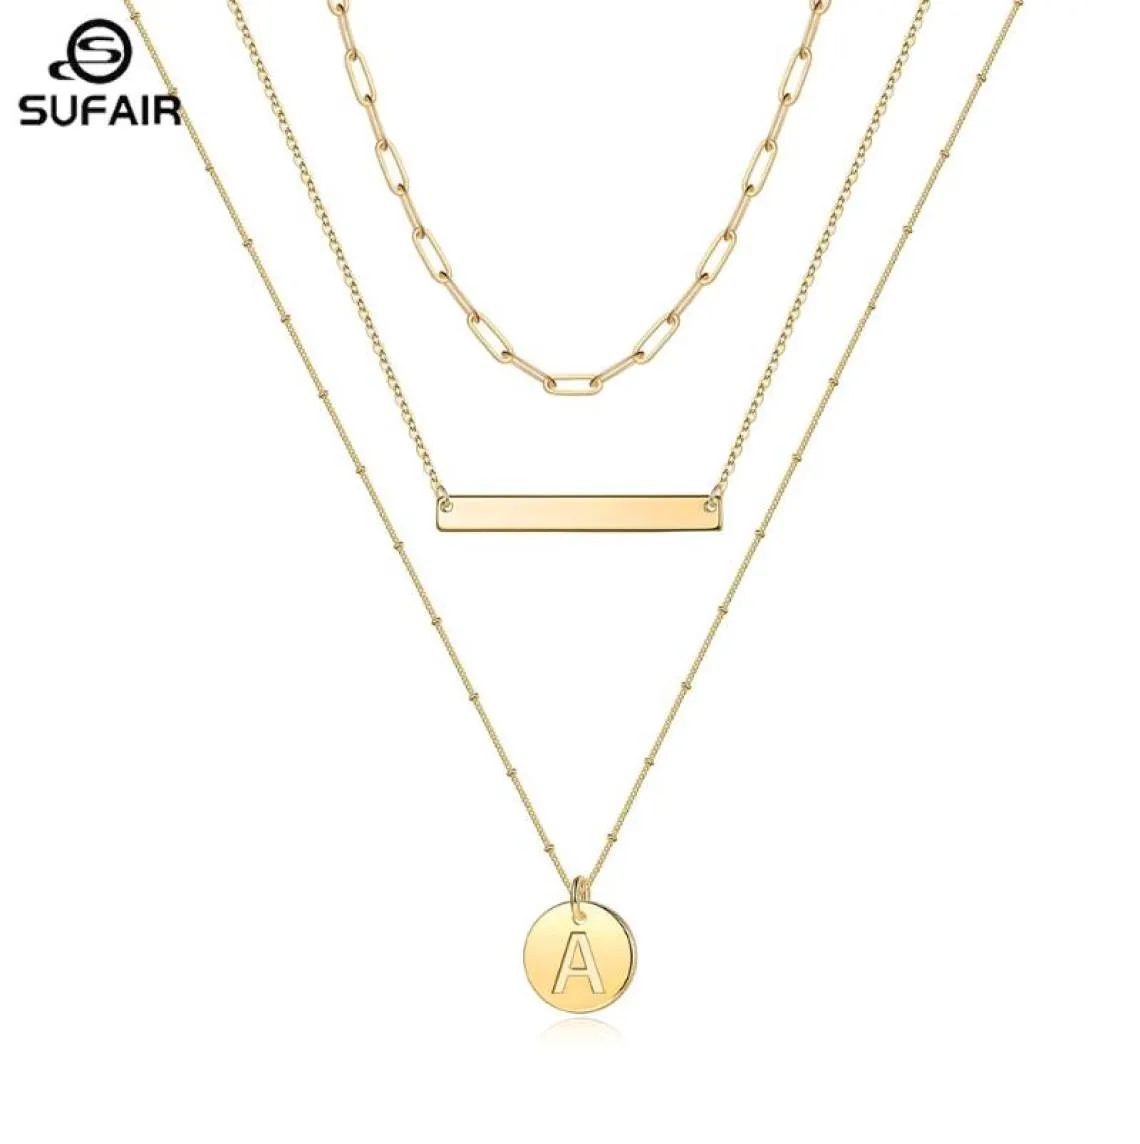 Kedjor Sufair Layered Disc Initial Charm Necklace For Women 14k Gold Filled PaperClip Chain Bar Letter Pendant Jewelry9813943